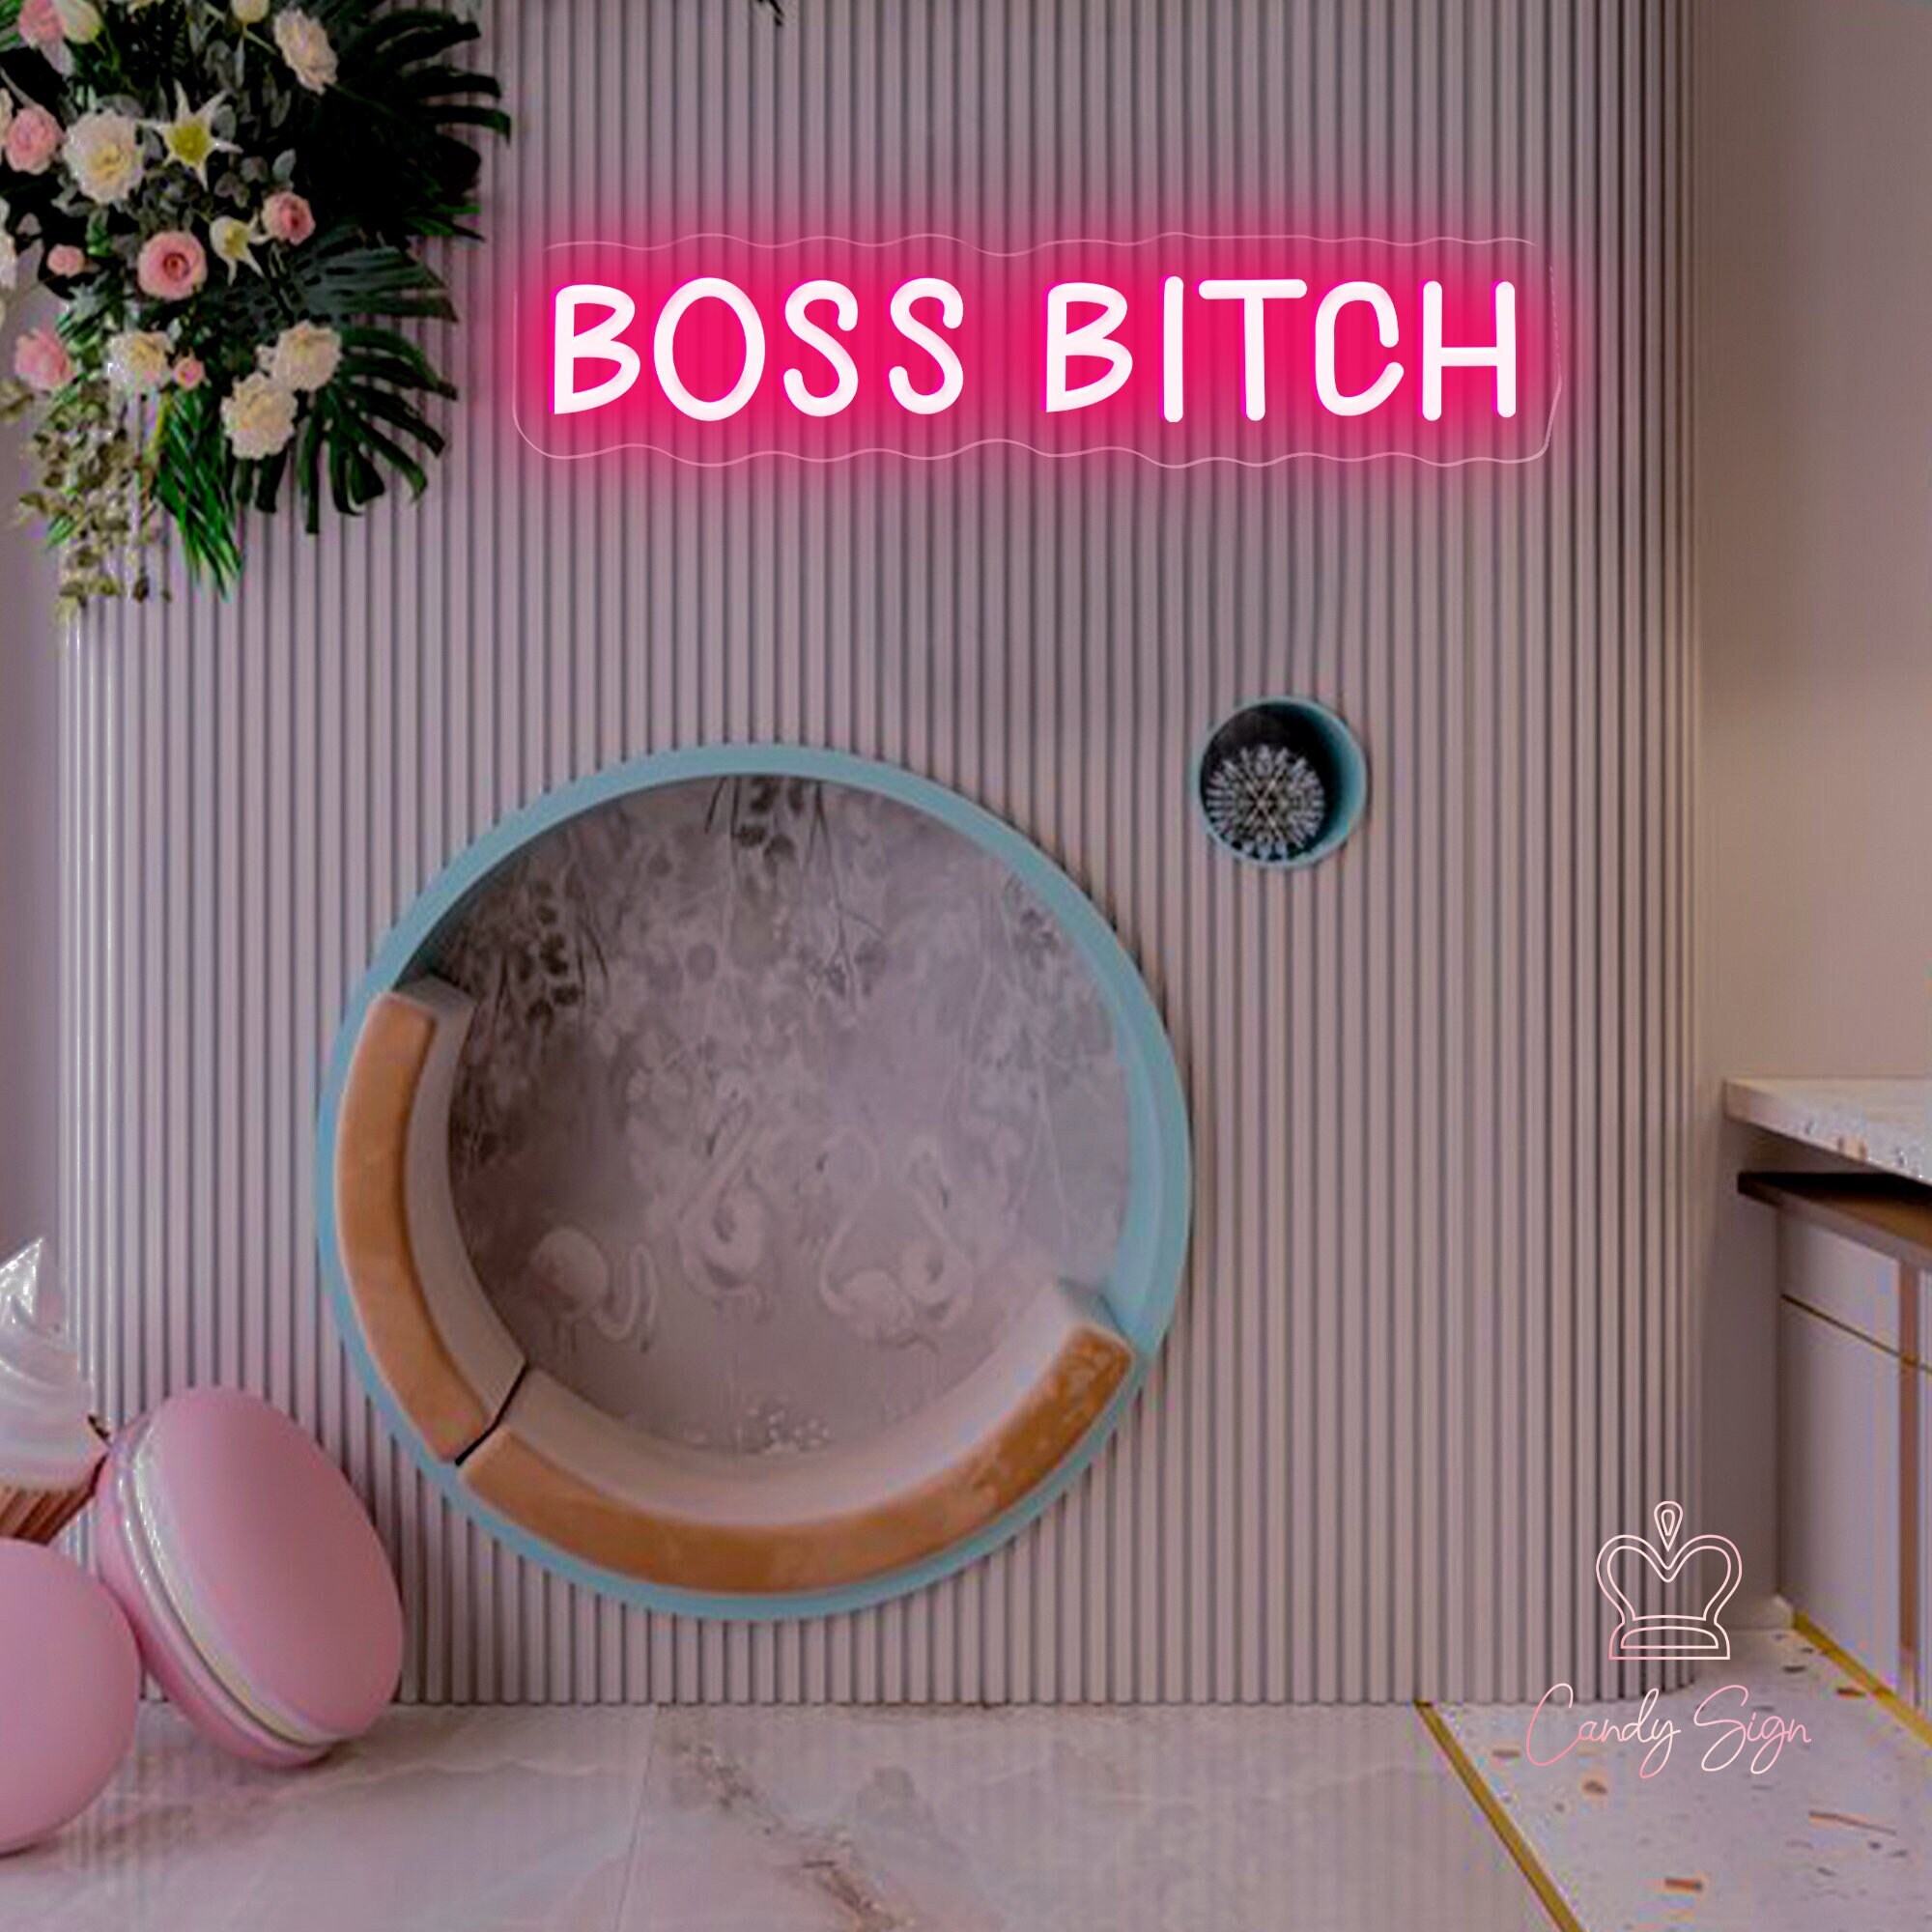 Boss Bitch Led Neon Light / Boss Bitch Led Neon Sign / Birthday Gift / Home  Decoration / Neon Sign Custom / Personalized Gifts 